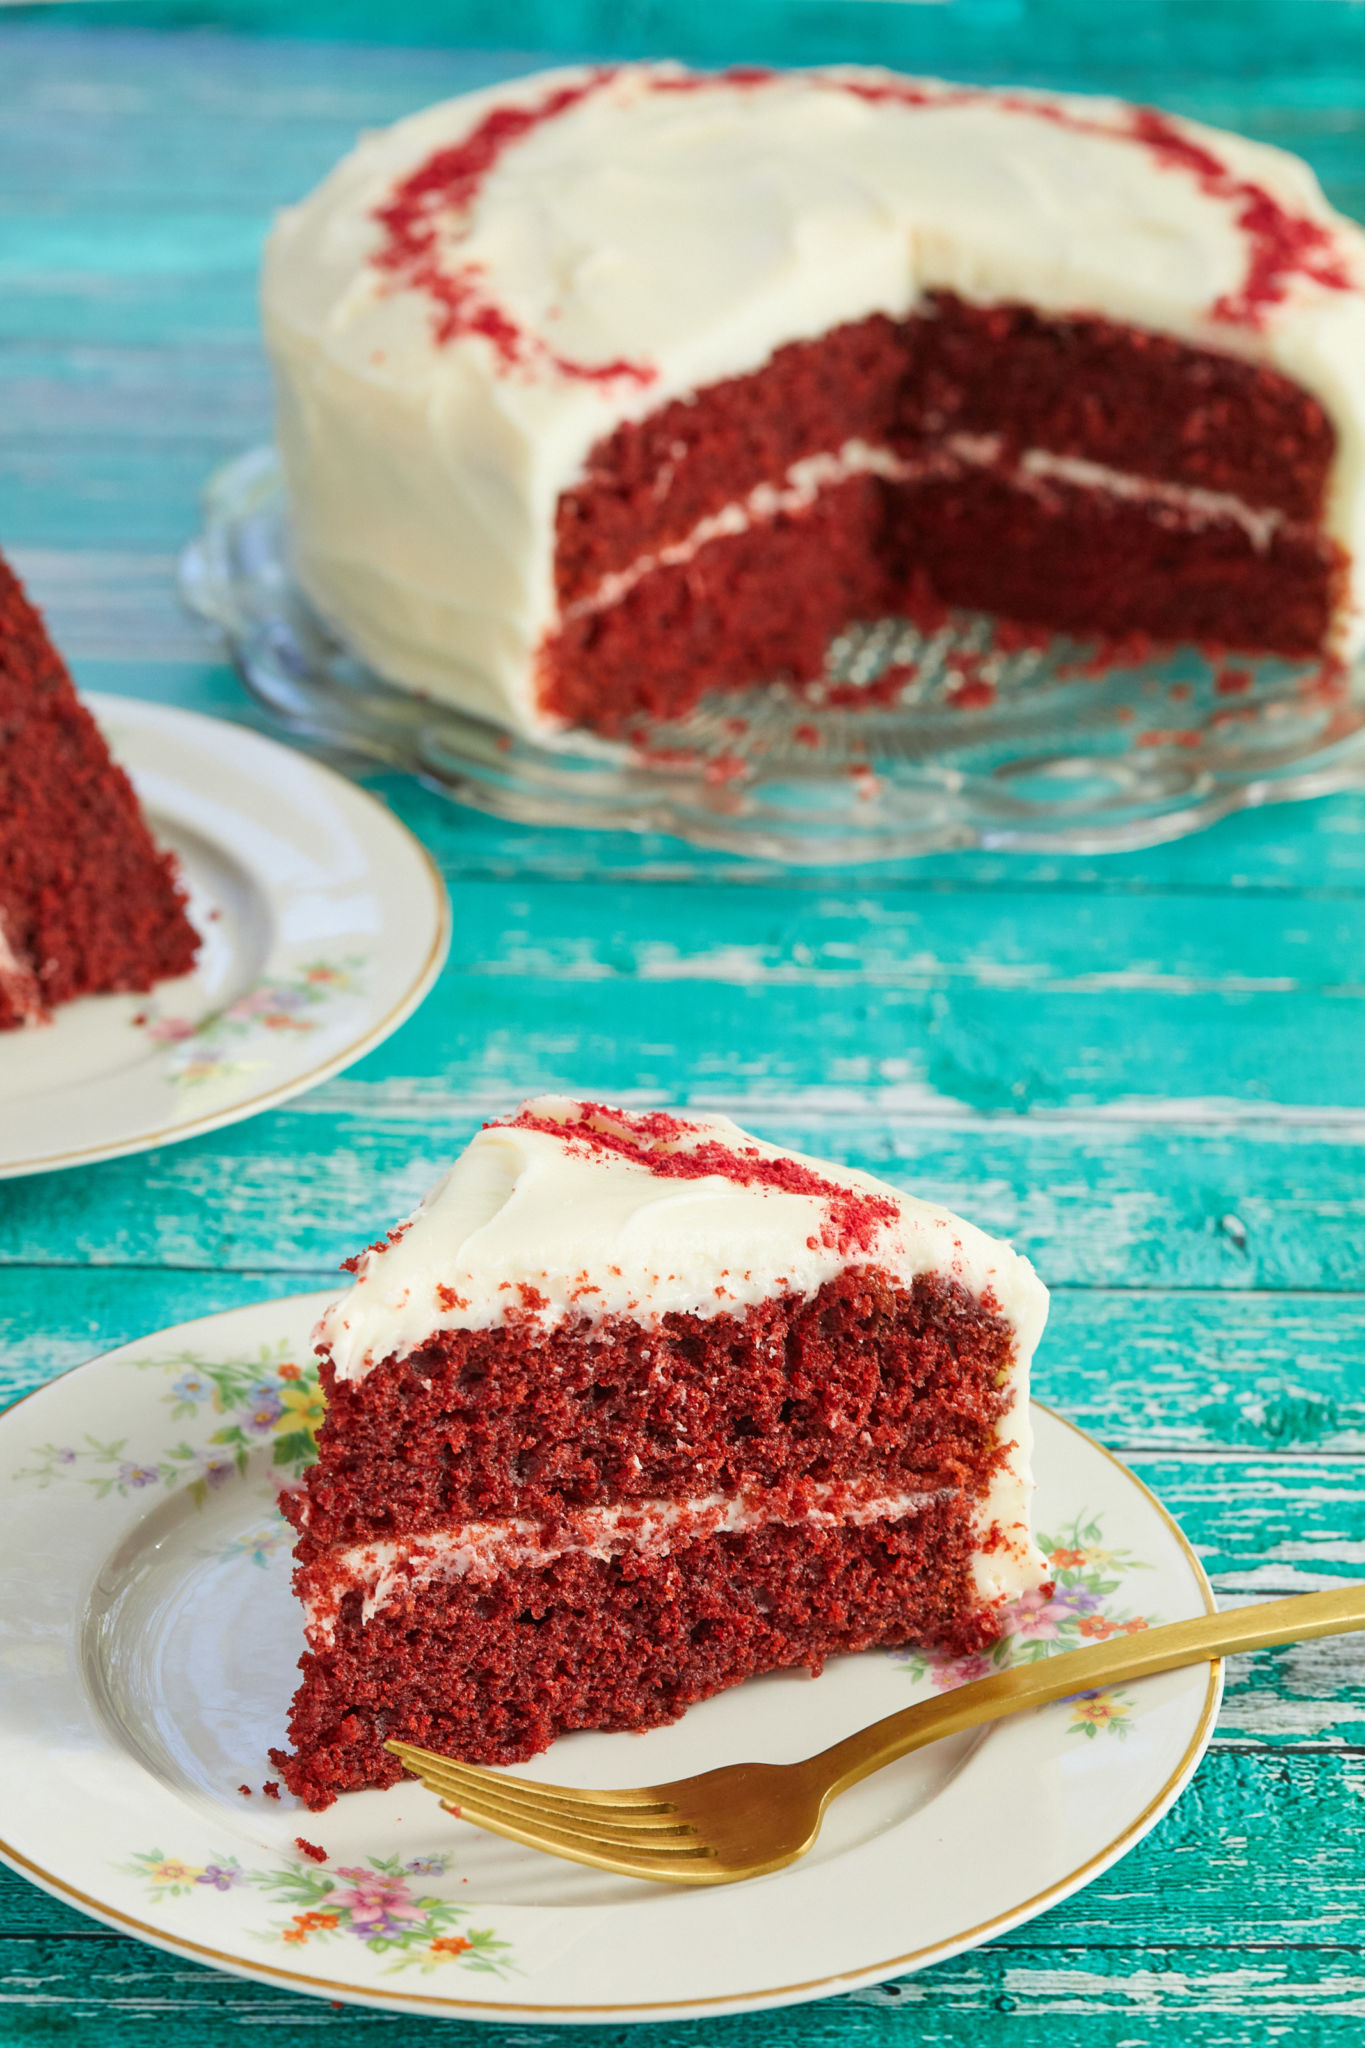 A slice of my moist Best-Ever Red Velvet Cake recipe, topped with ermine frosting.